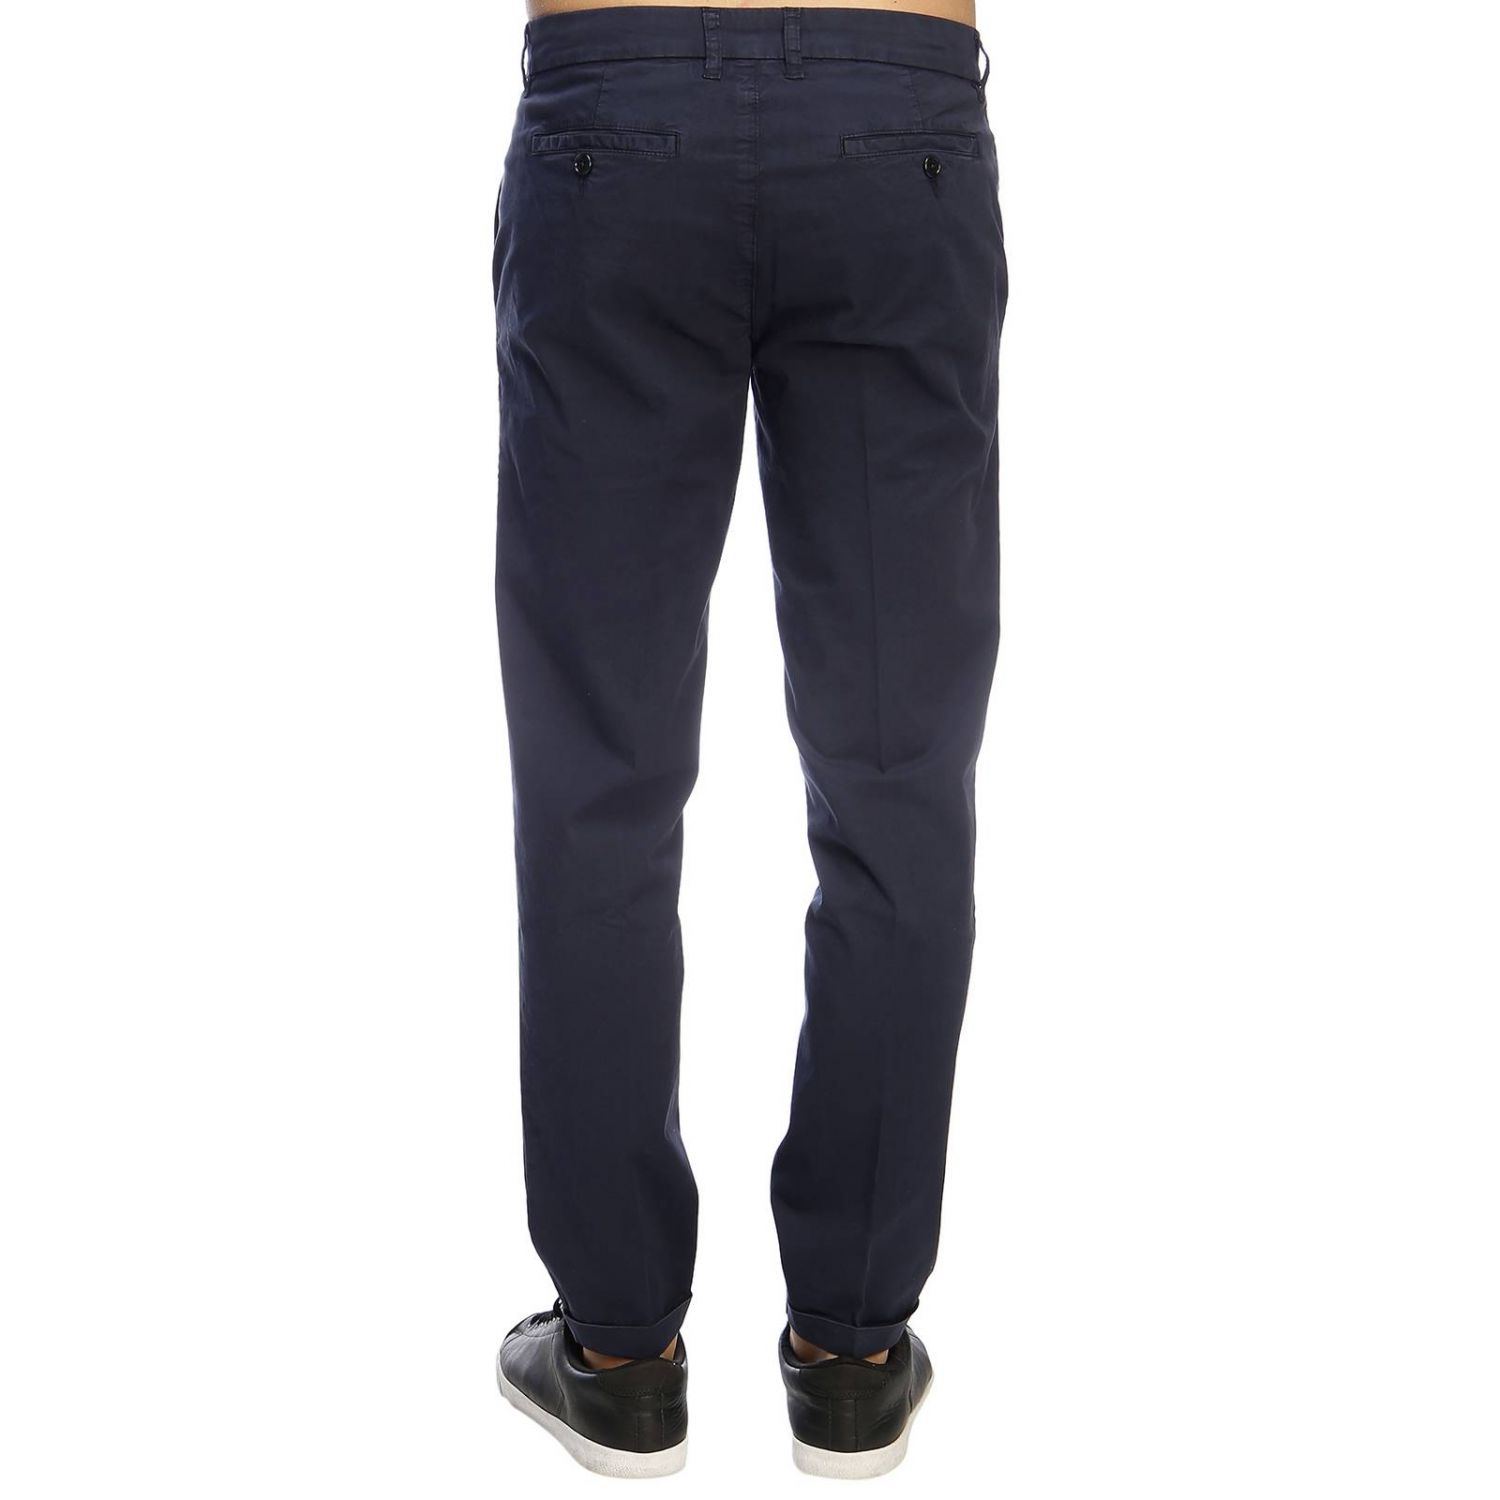 Fay Outlet: Pants men - Blue | Pants Fay NTM8638187T GUR GIGLIO.COM